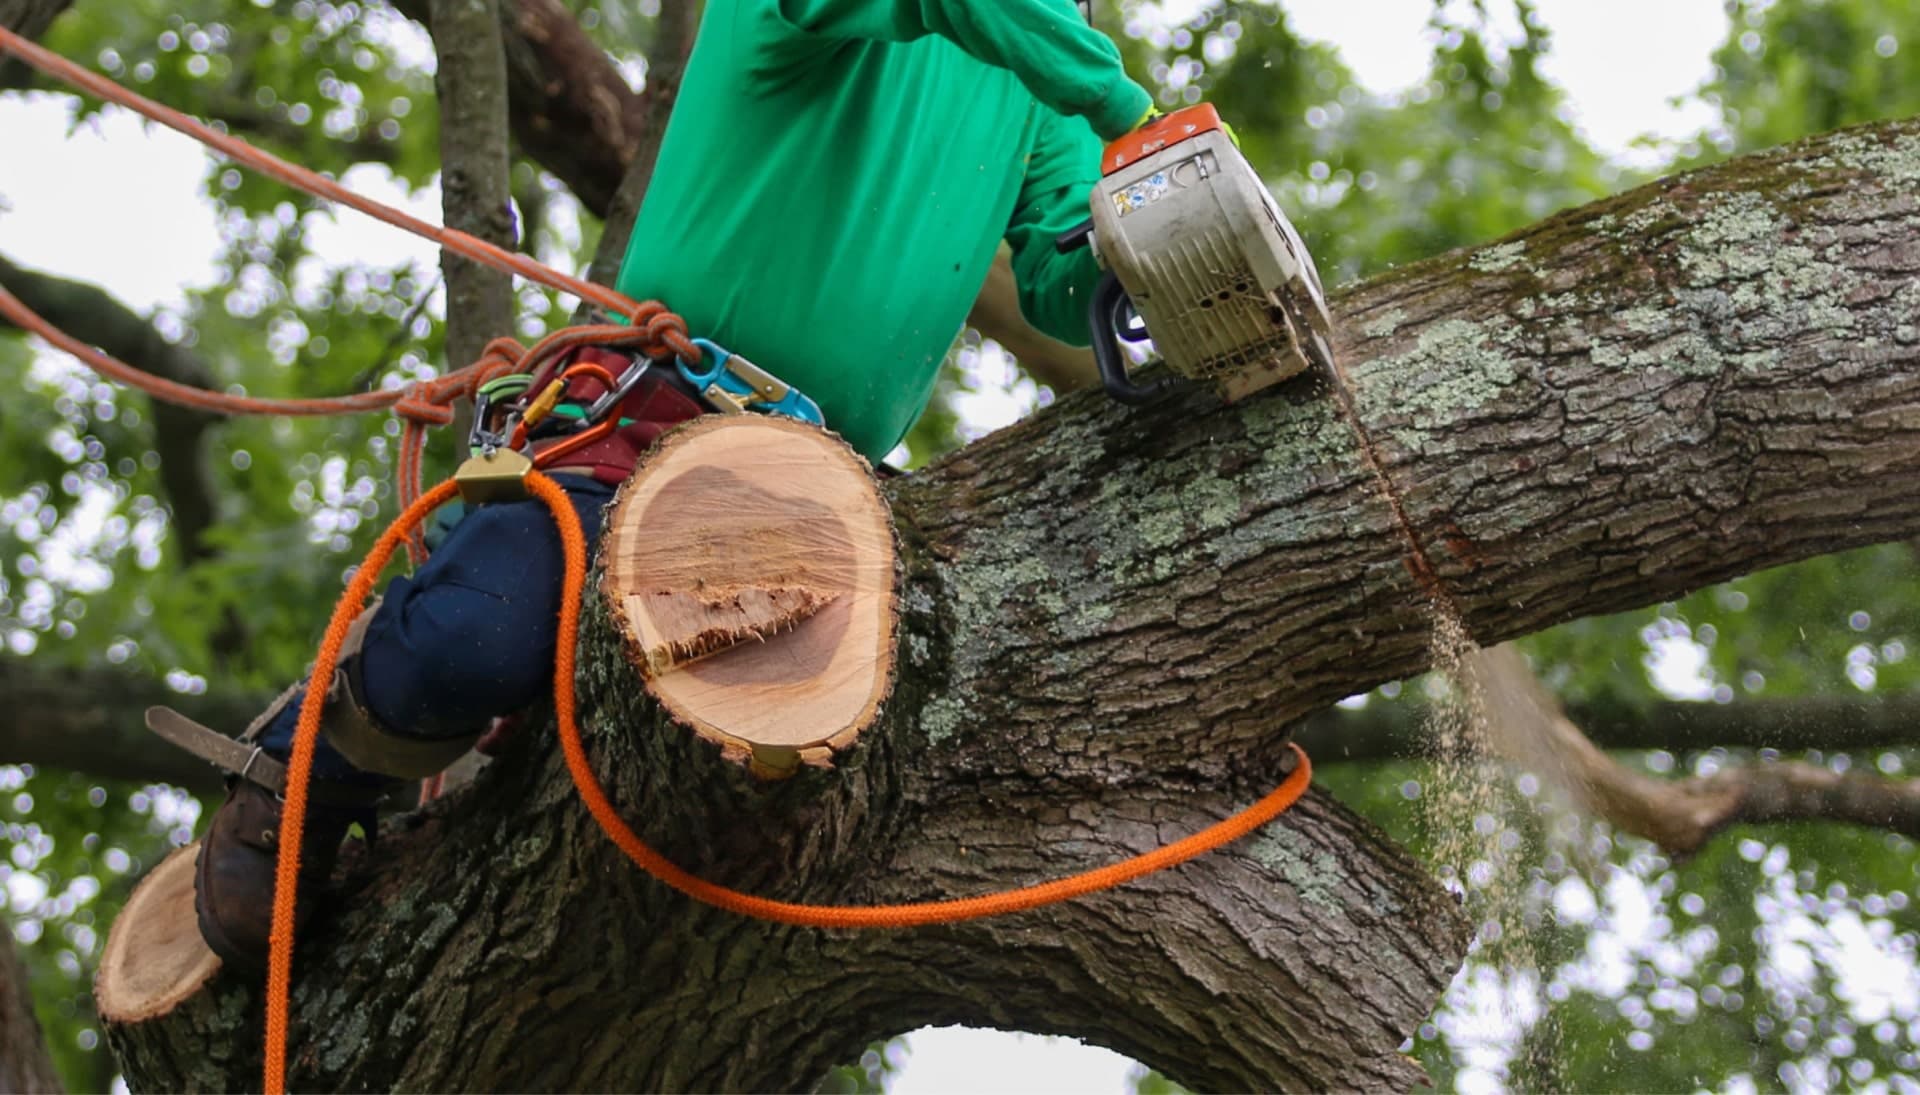 Shed your worries away with best tree removal in Englewood